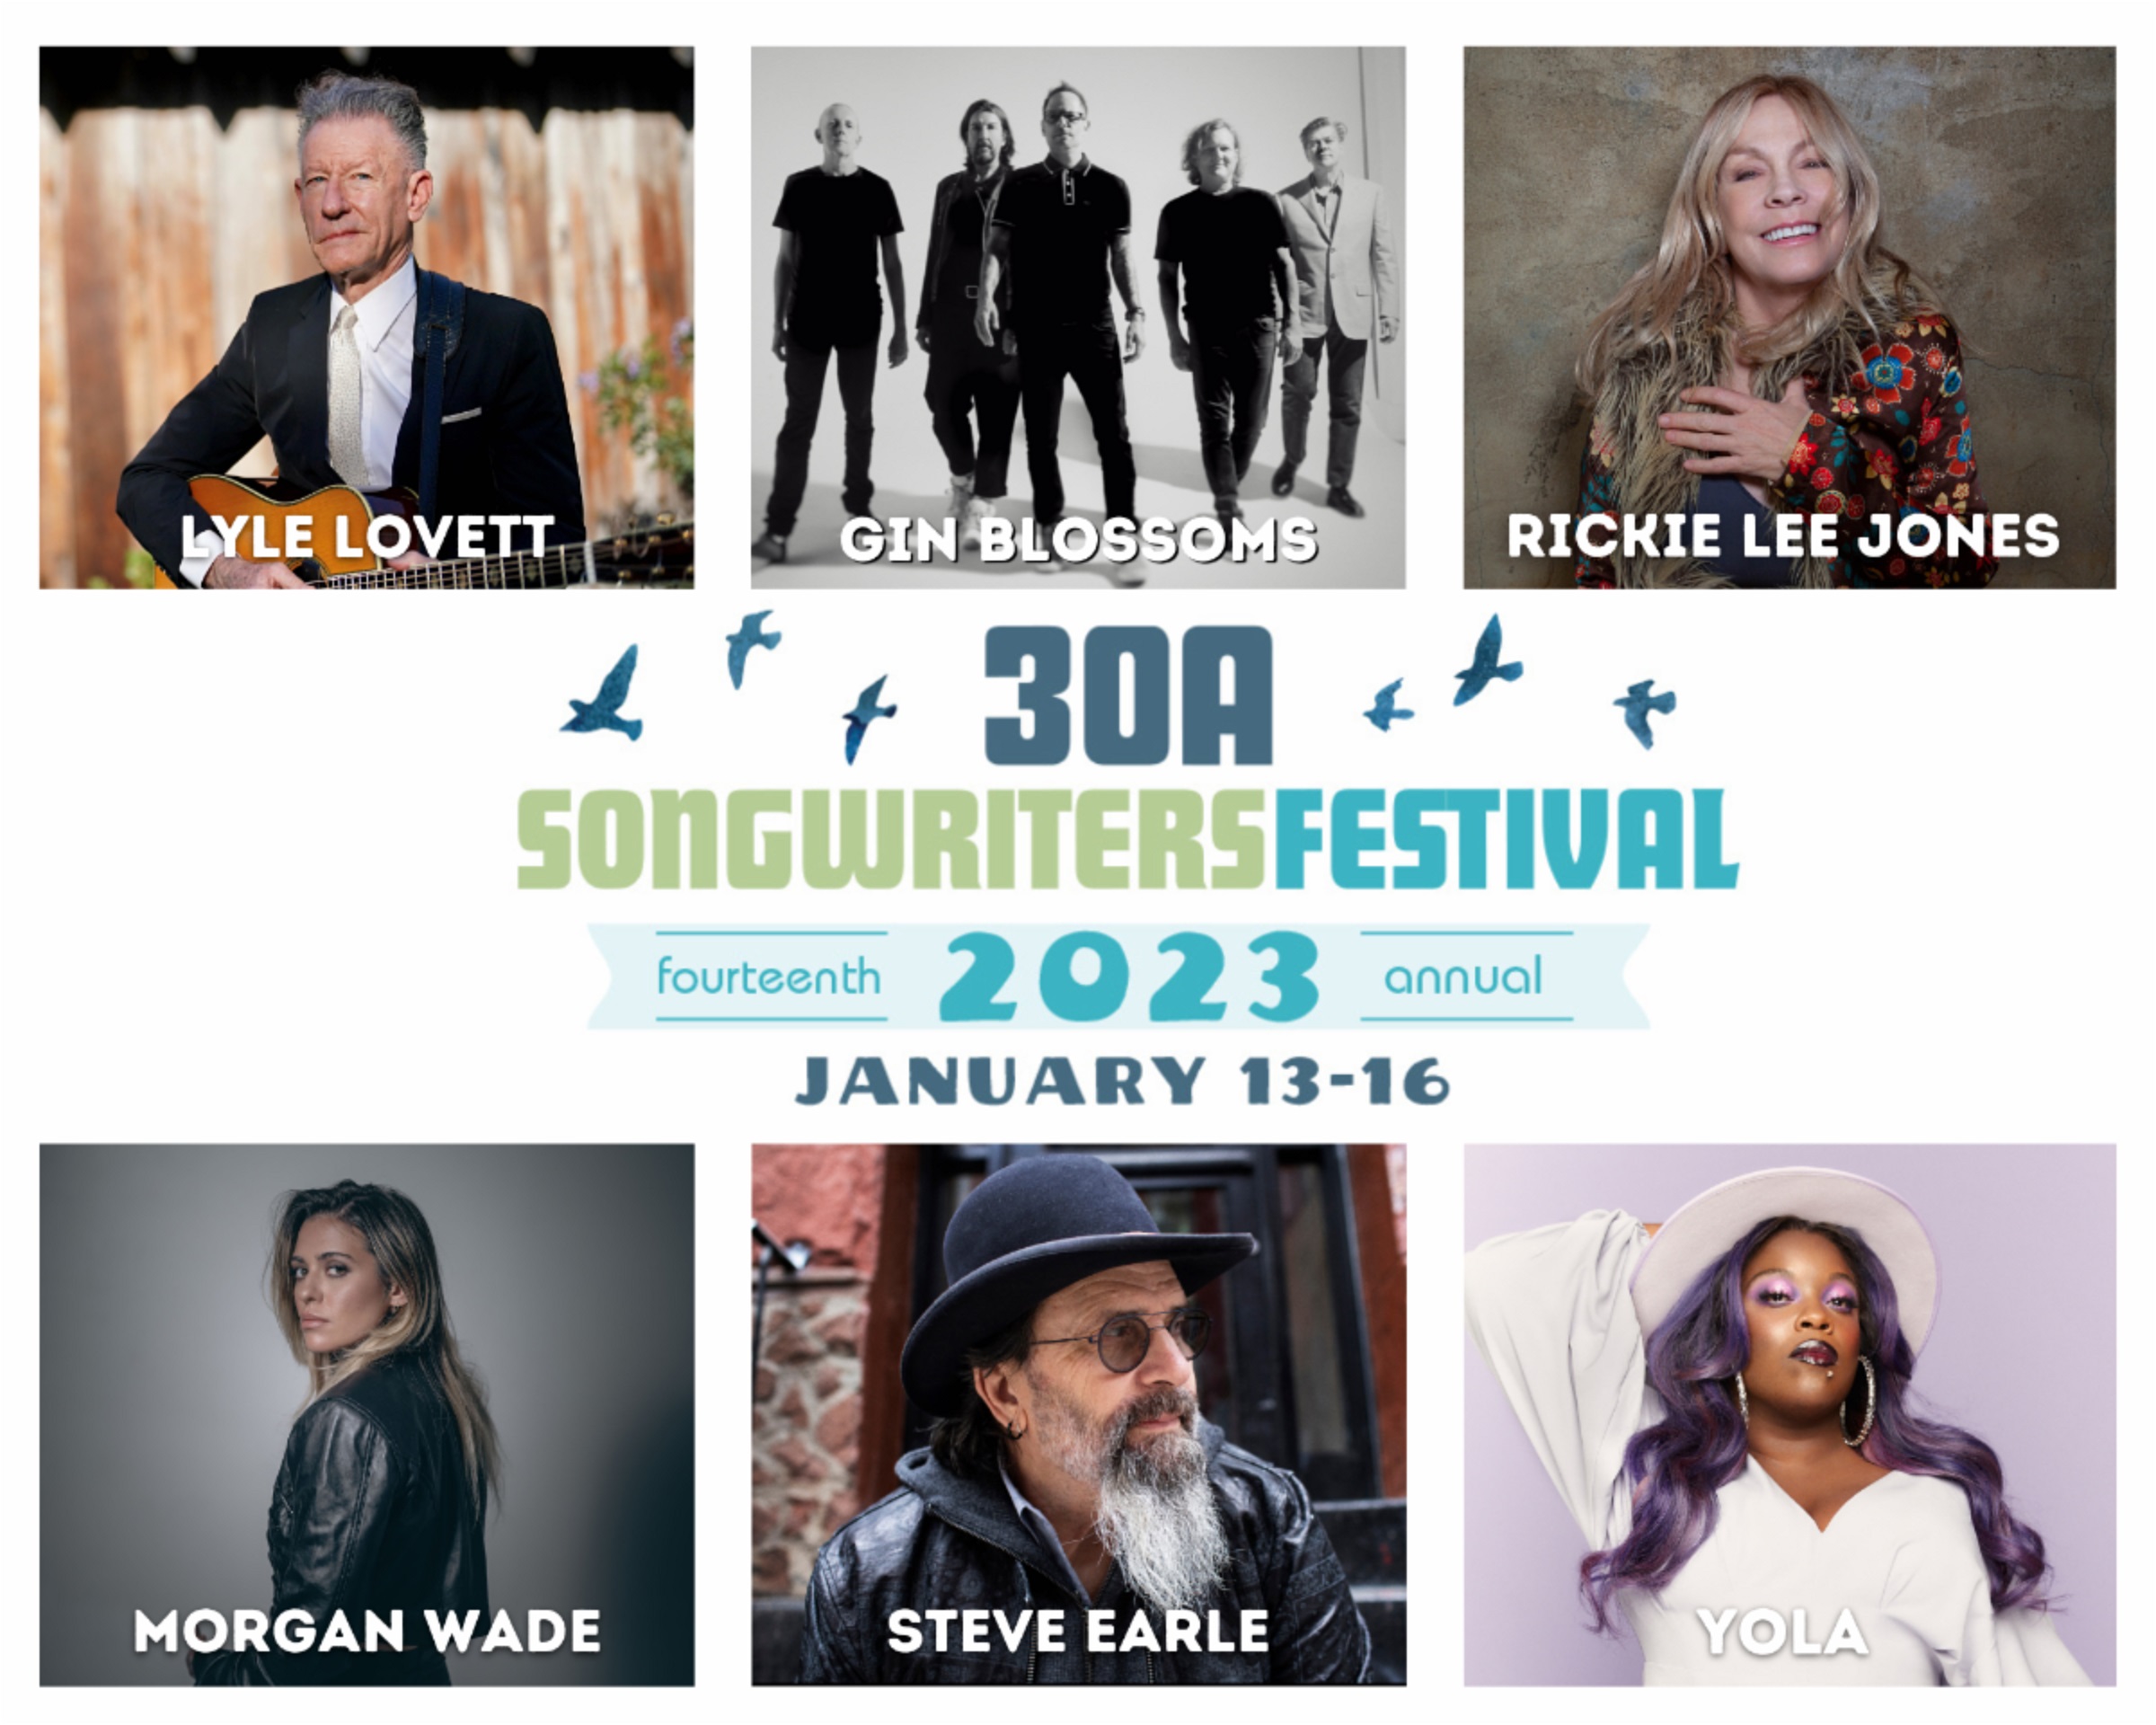 30A SONGWRITERS FESTIVAL announces 2023 headliners including Lyle Lovett, Gin Blossoms, Rickie Lee Jones, Steve Earle and more